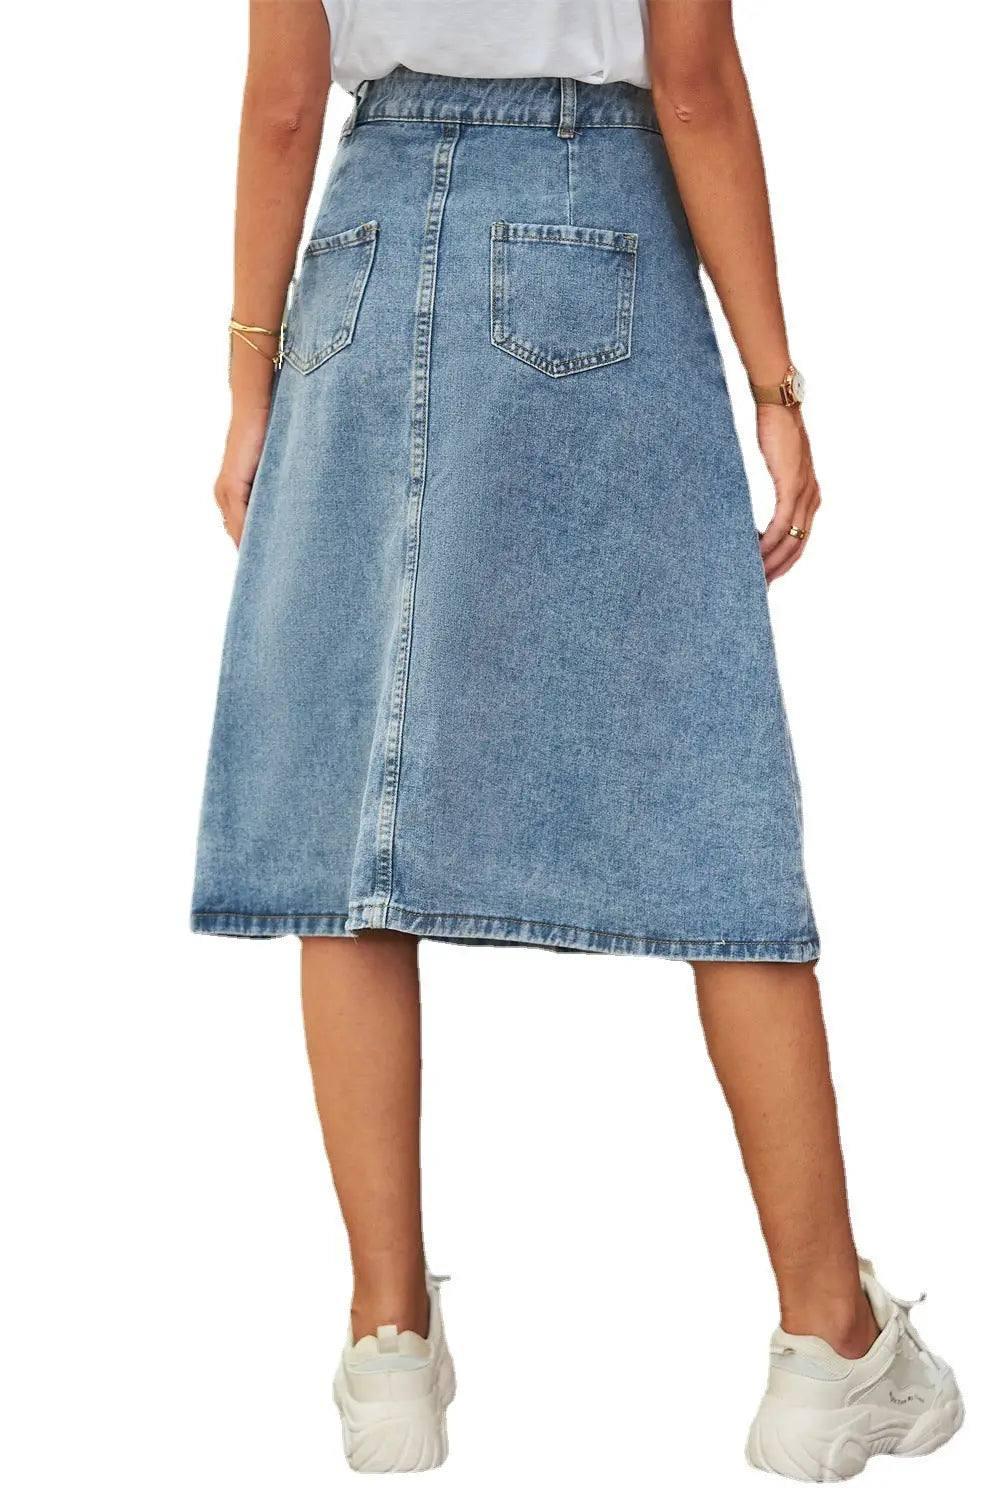 All-matching Slimming Washed Denim Breasted Skirt Women-Blue-5